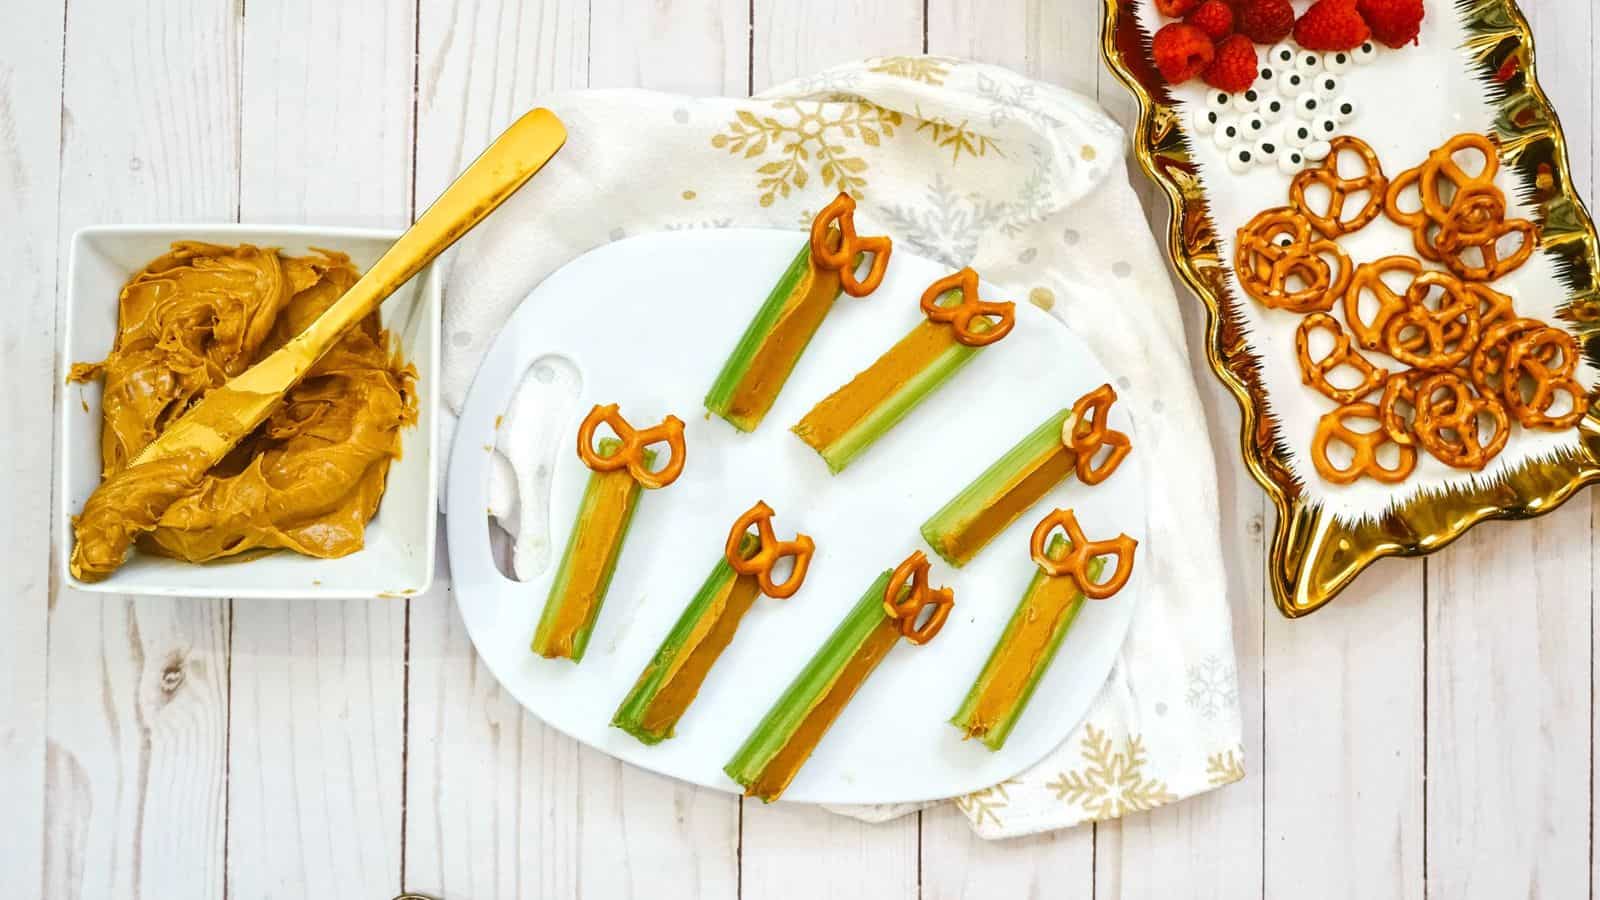 I'm so happy to finally find a healthy Christmas treats! Instead of cute cupcakes, I'm taking THESE crunchy snacks to our next party!